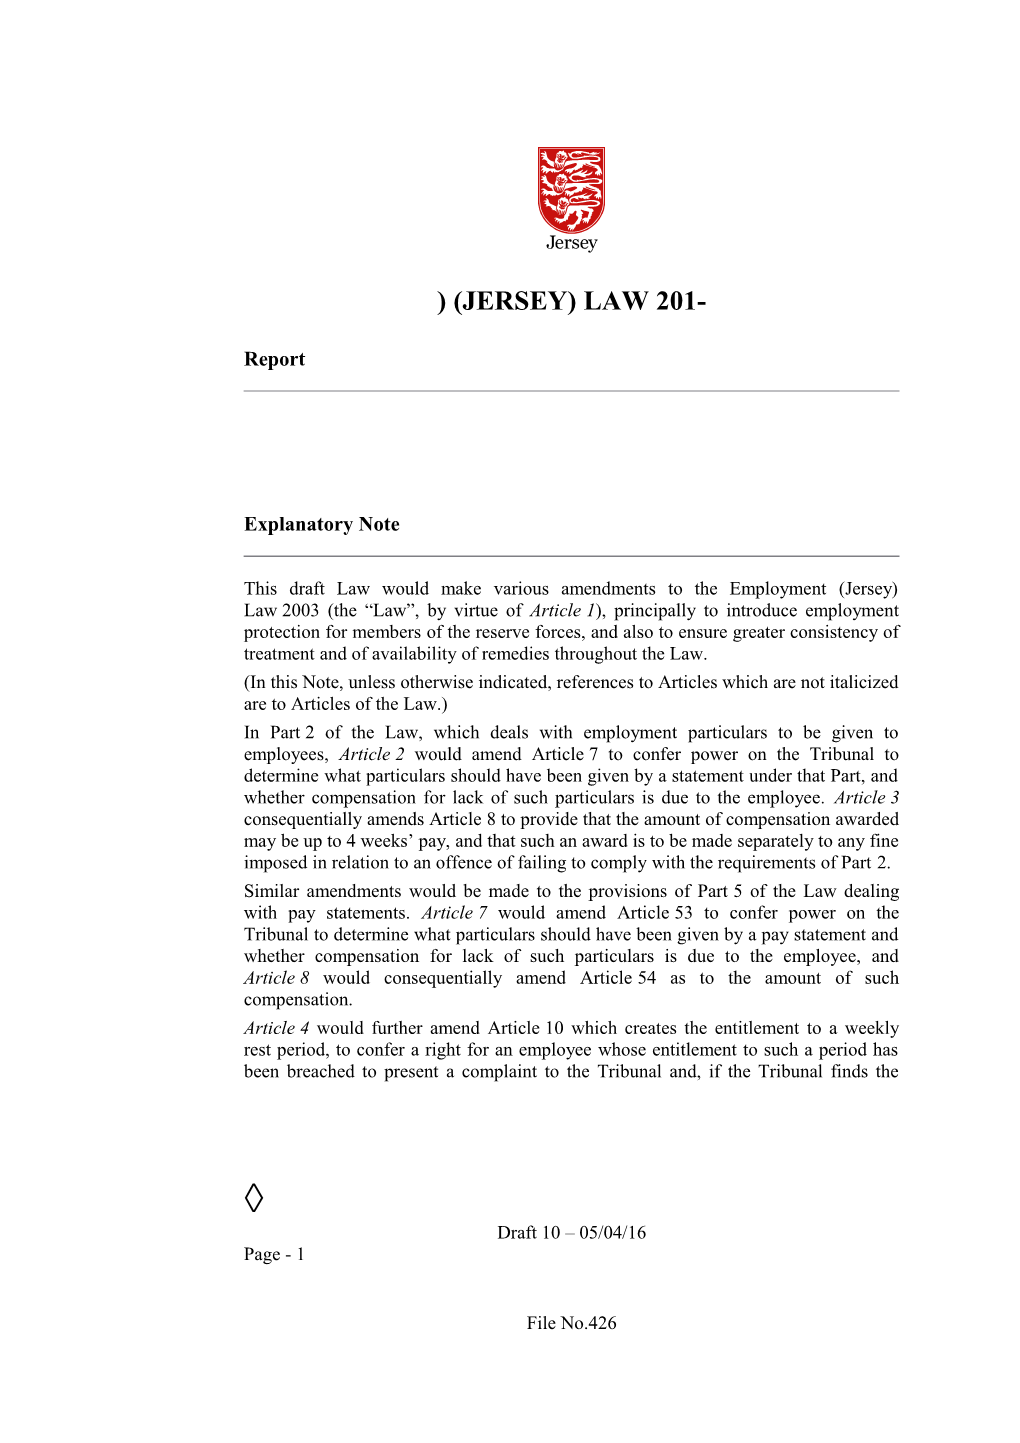 Draft 1 - Showing the Law at 28/07/15 - Employment (Amendment No. 10) (Jersey) Law 201